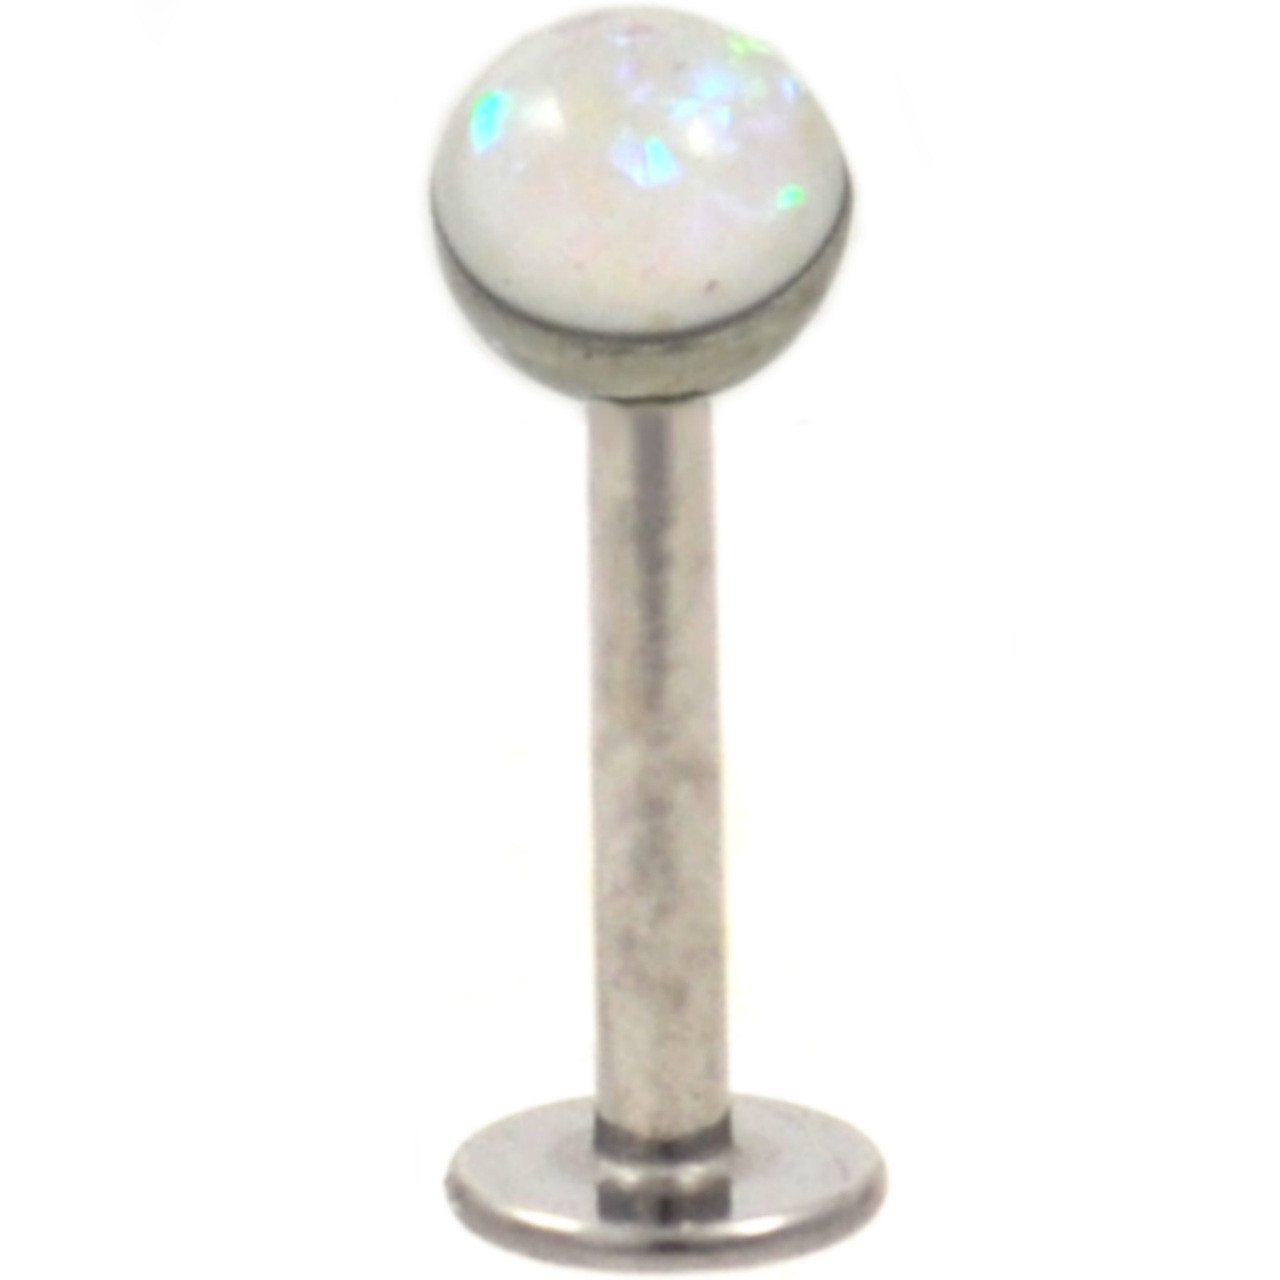 Sold Individually 16G White Imitation Opal Glitter Shower Dome Steel Labret